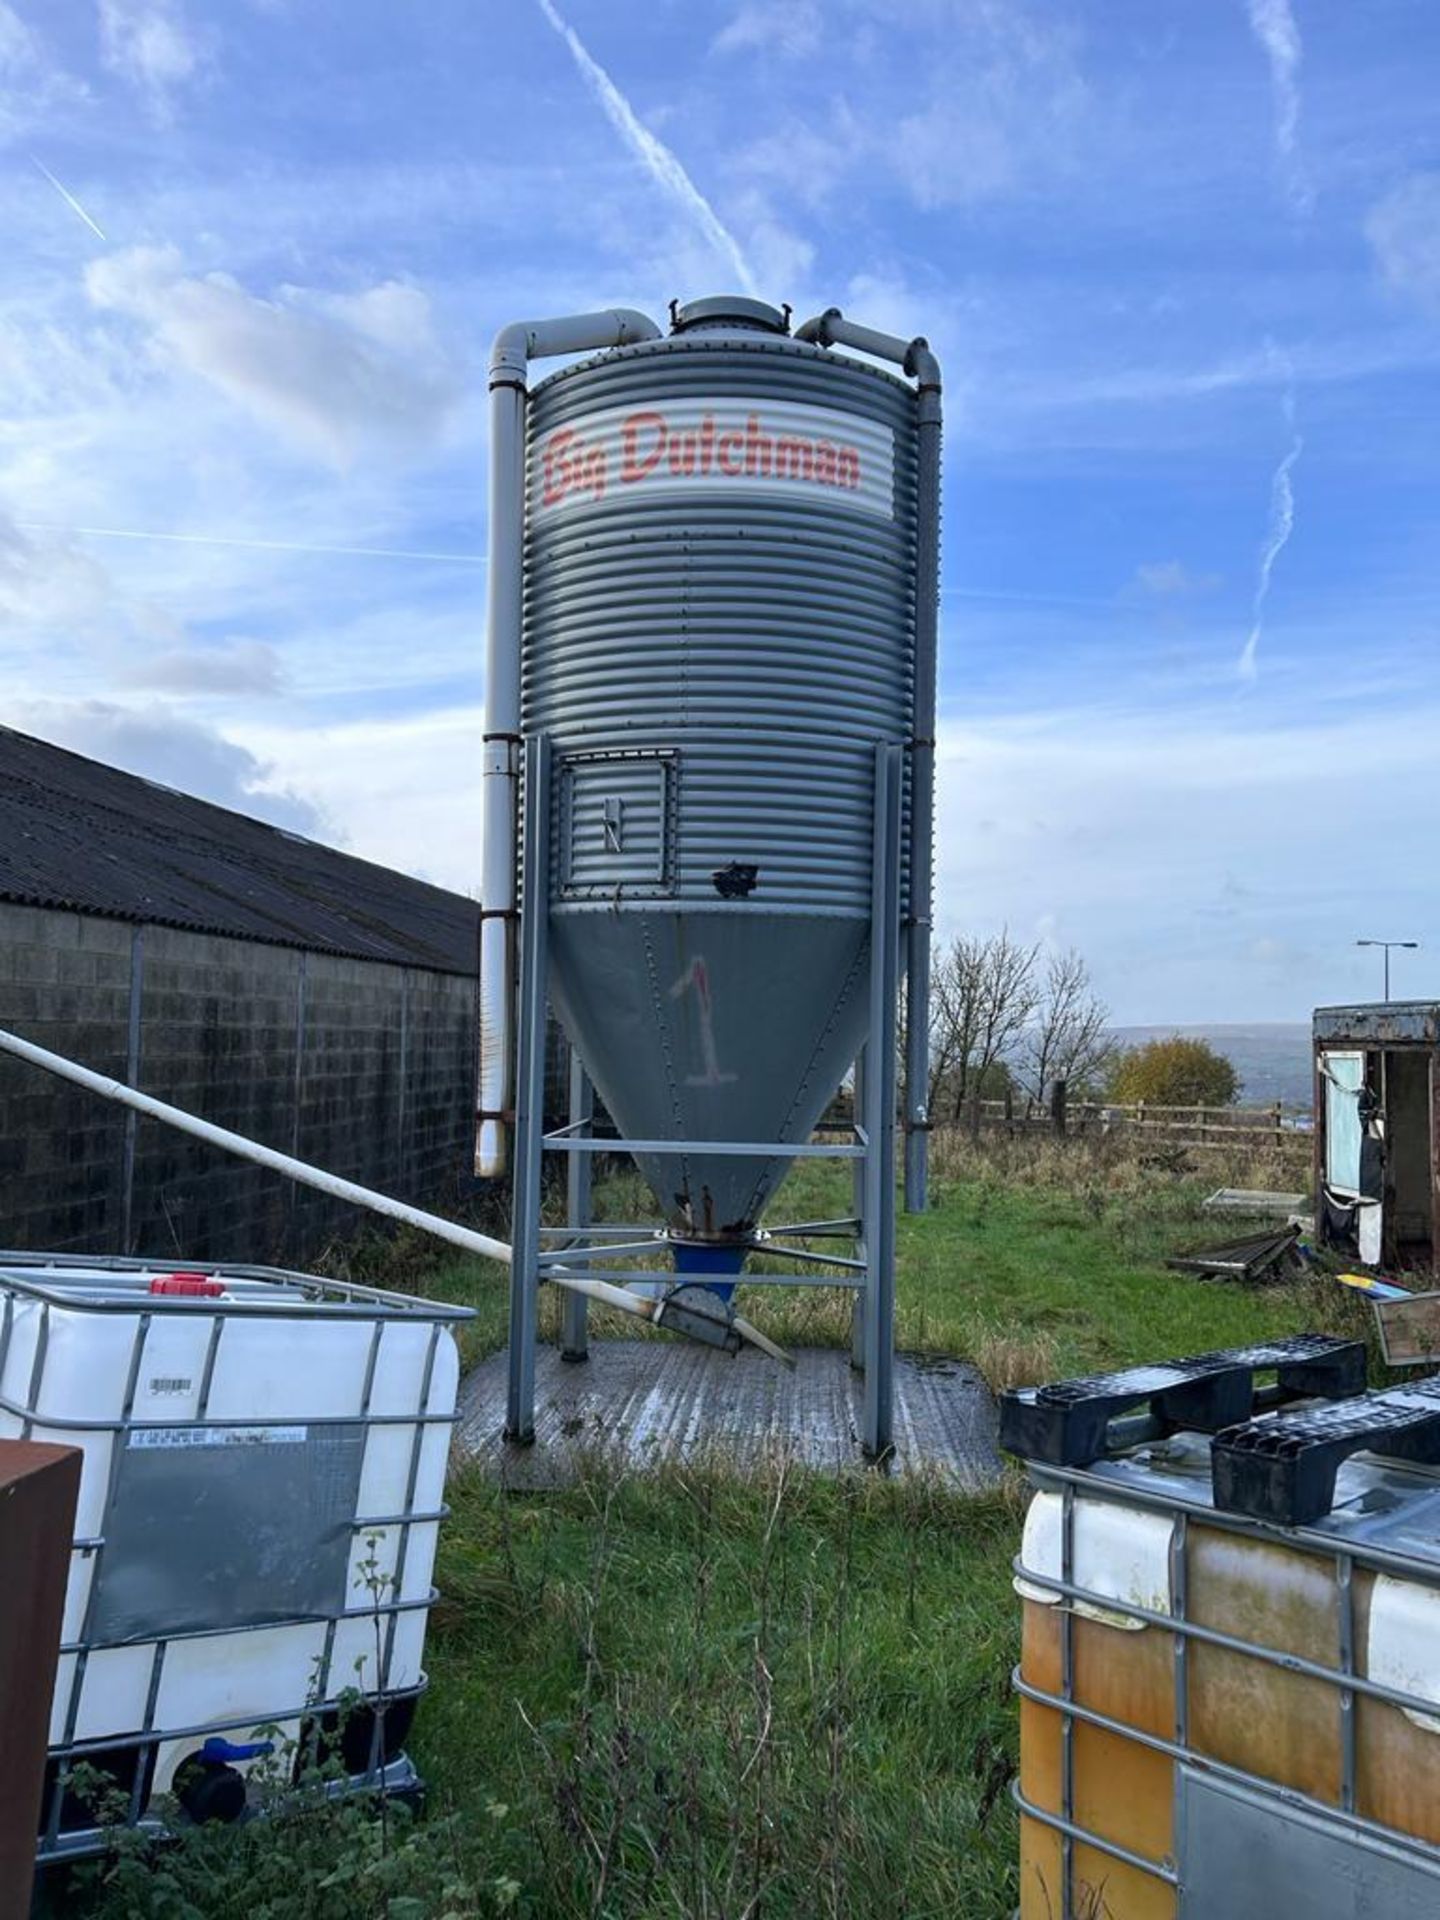 BIG DUTCHMAN GRAIN SILO NO VAT TO BE COLLECTED FROM OLDHAM OL15 0RA THE VENDOR WILL DELIVER AT A - Image 5 of 5